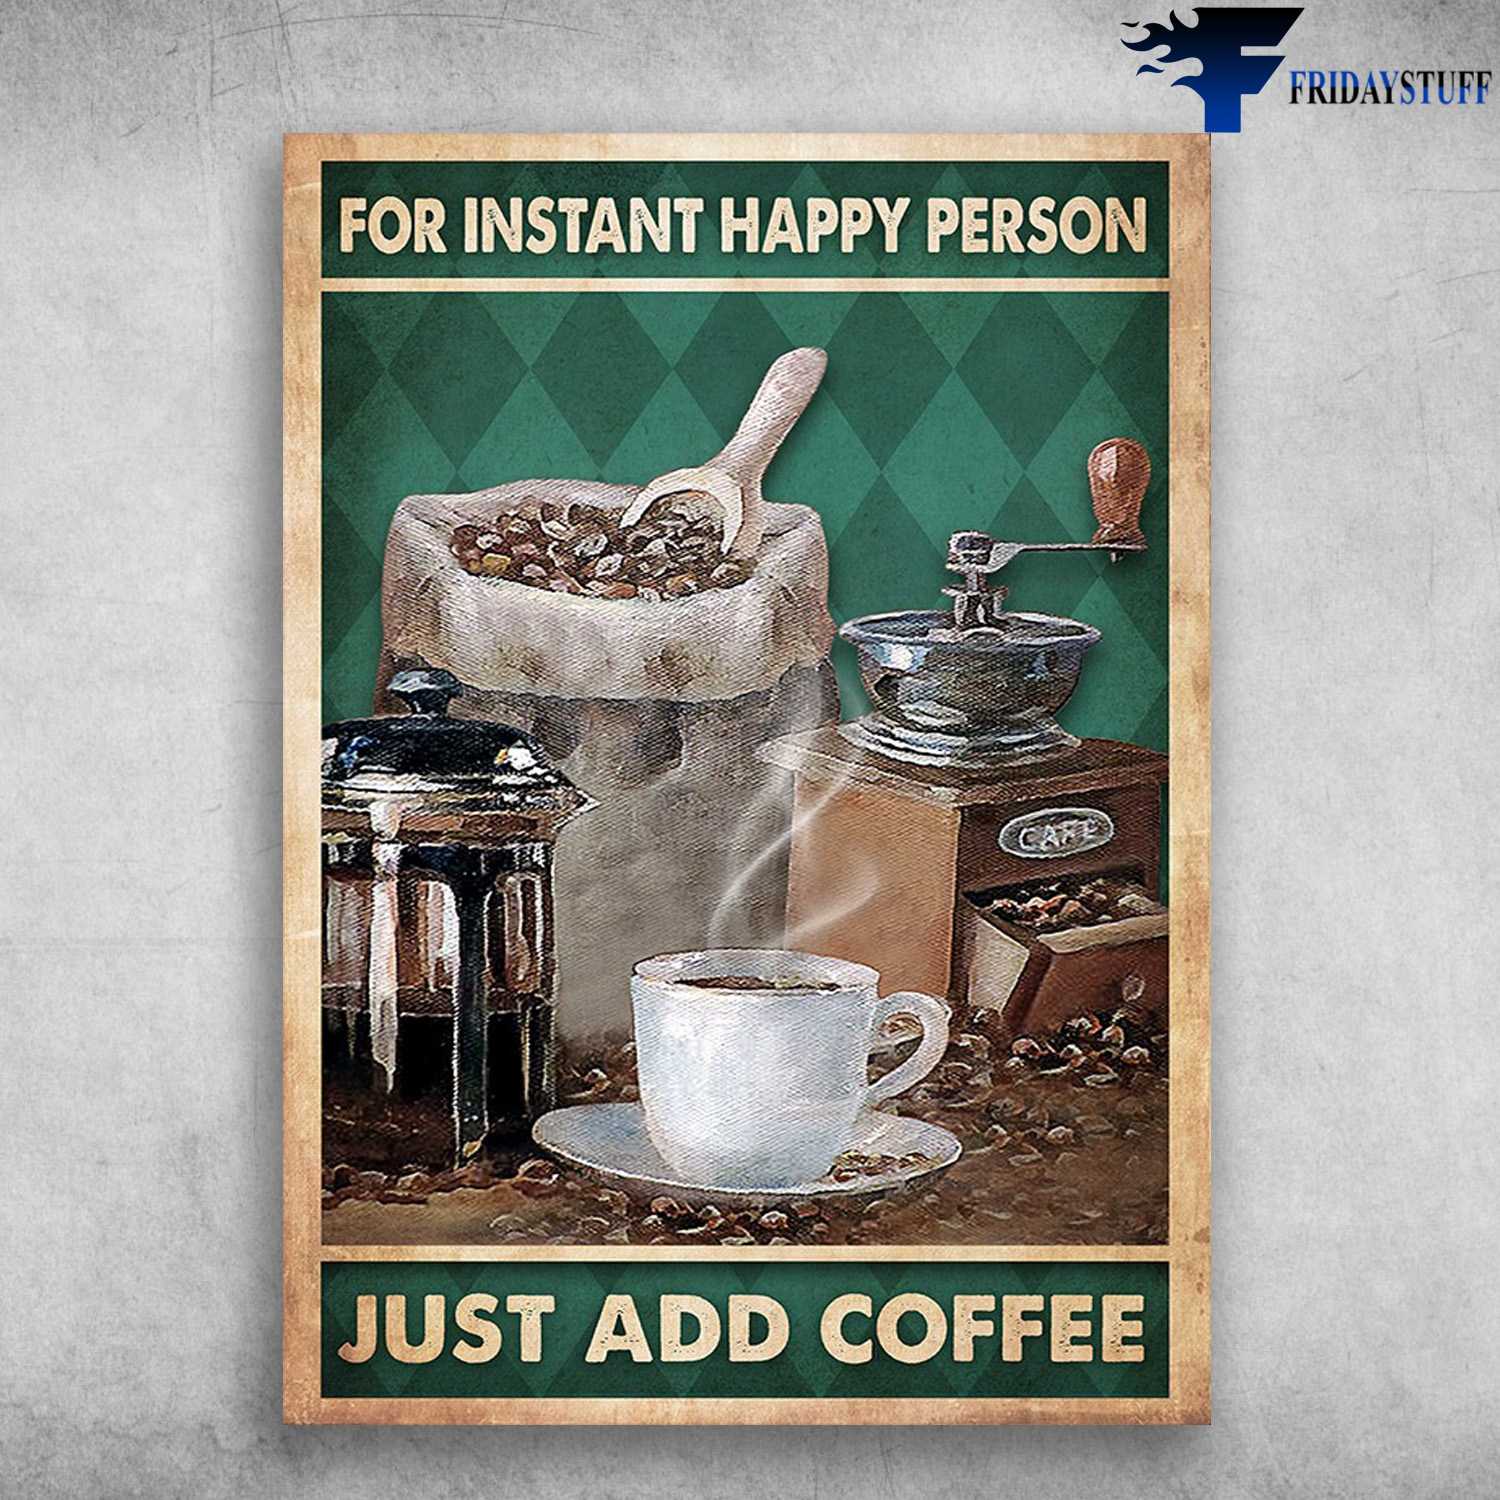 Coffee Poster - For Instant Happy Person, Just Add Coffee, A Cup Of Coffee